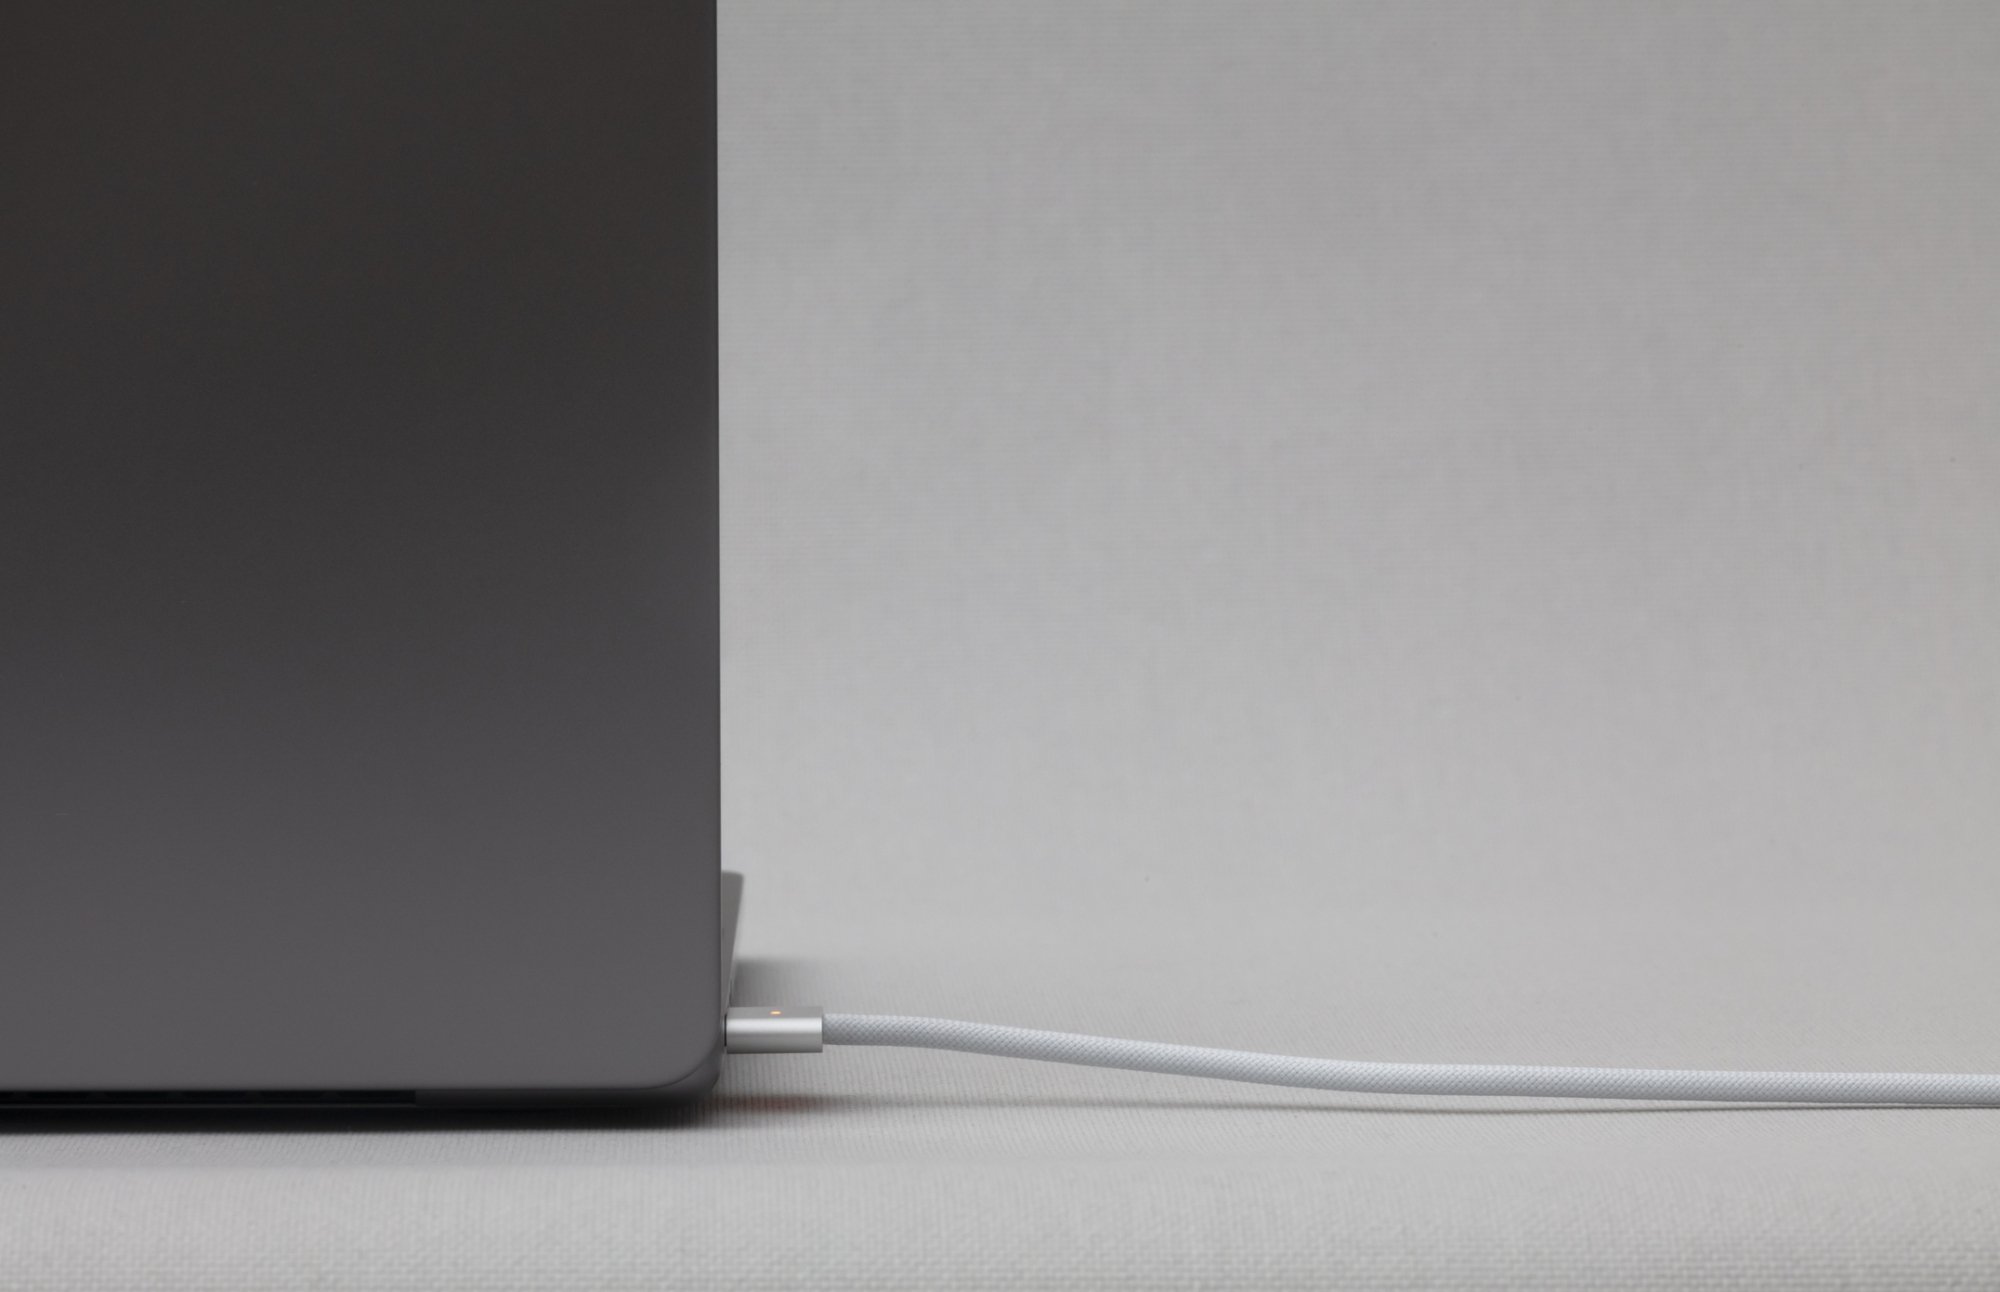 MacBook Pro with MagSafe cable